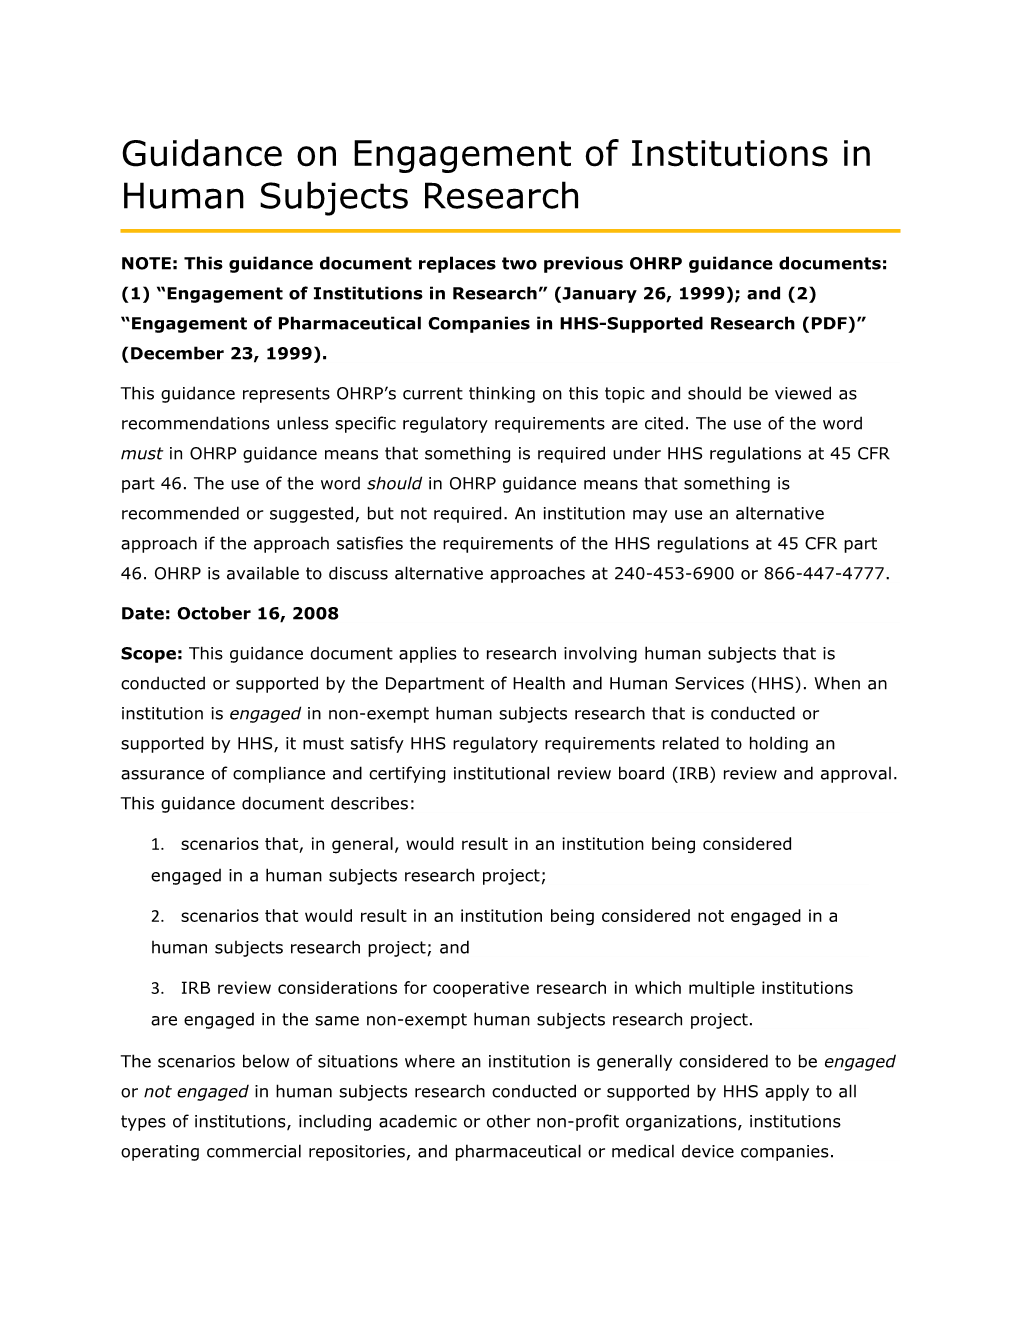 Guidance on Engagement of Institutions in Human Subjects Research